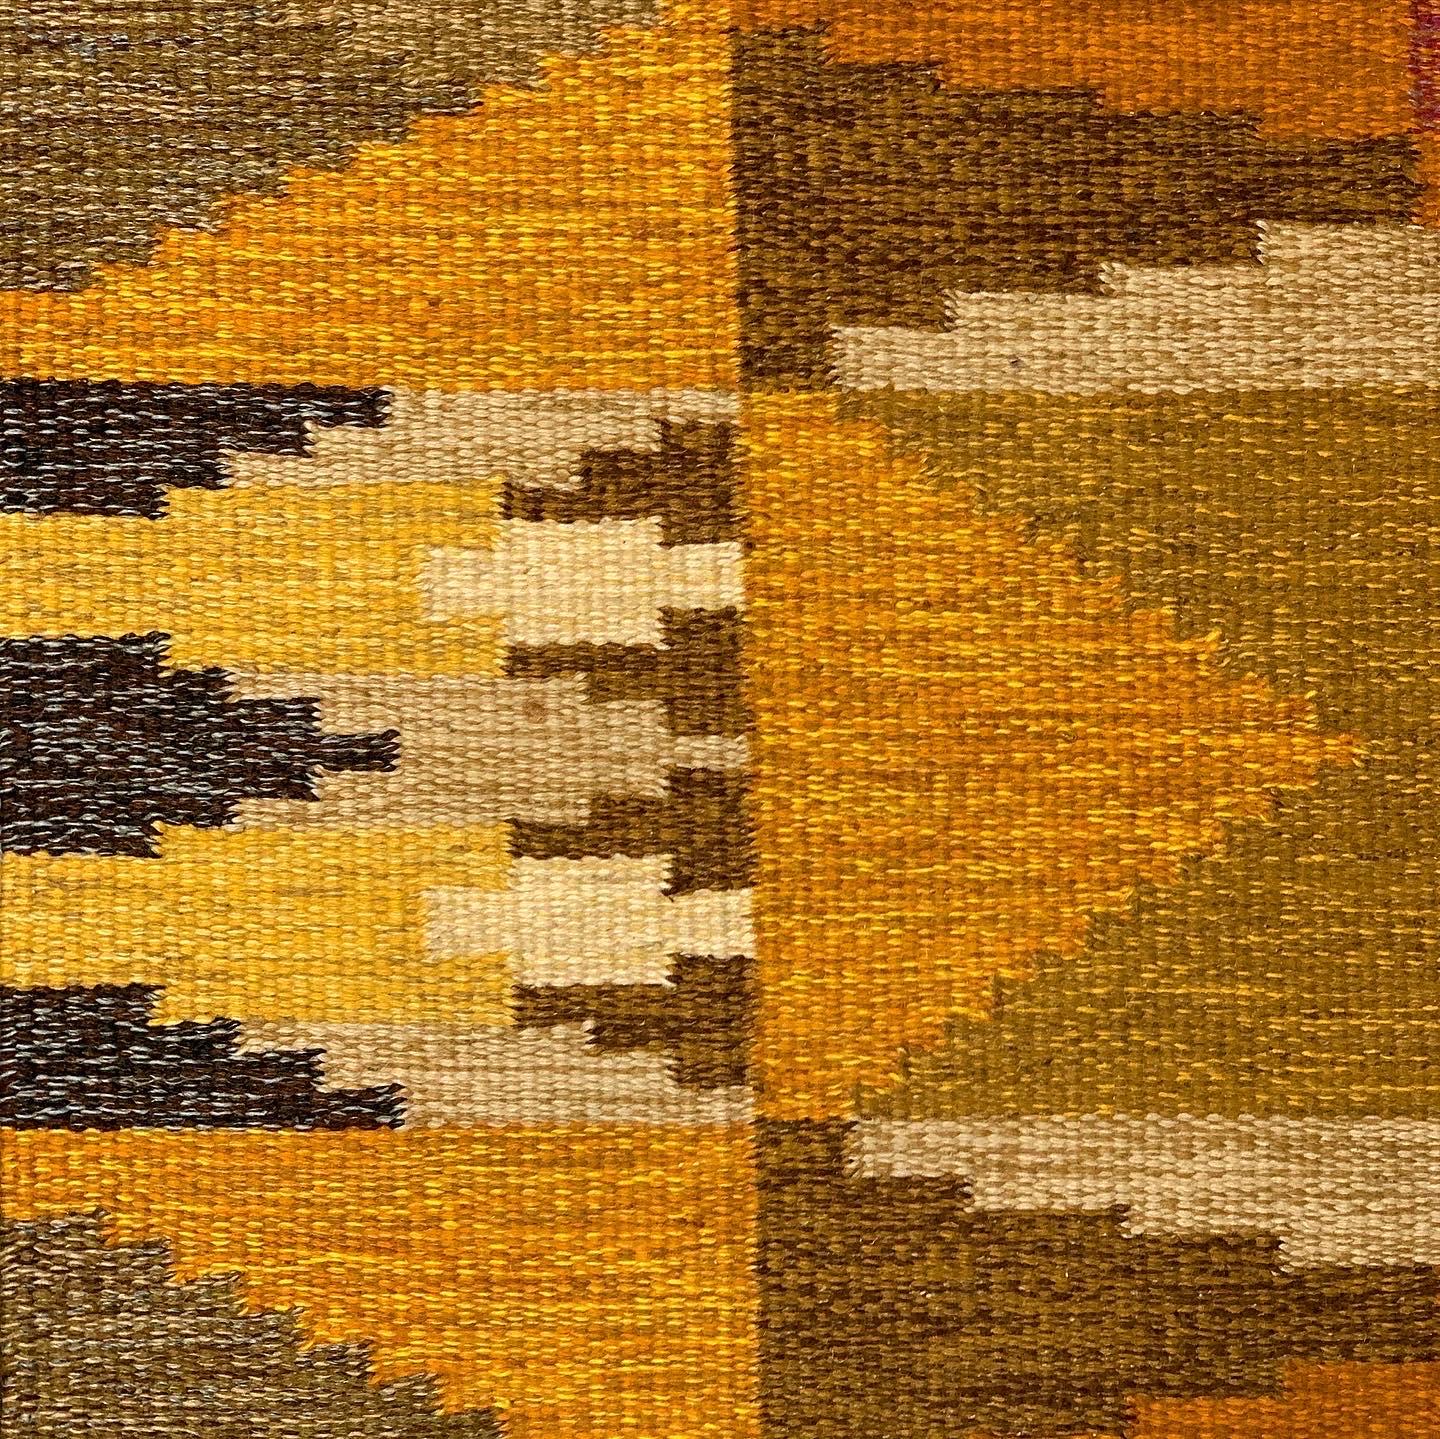 Swedish elegant Navajo with geometric patterns. Made of wool. It is very soft and in excellent condition for its age. Designed and produced in the 1950s. All fringe are in good condition. It would be a good addition in any rooms of the house. Please